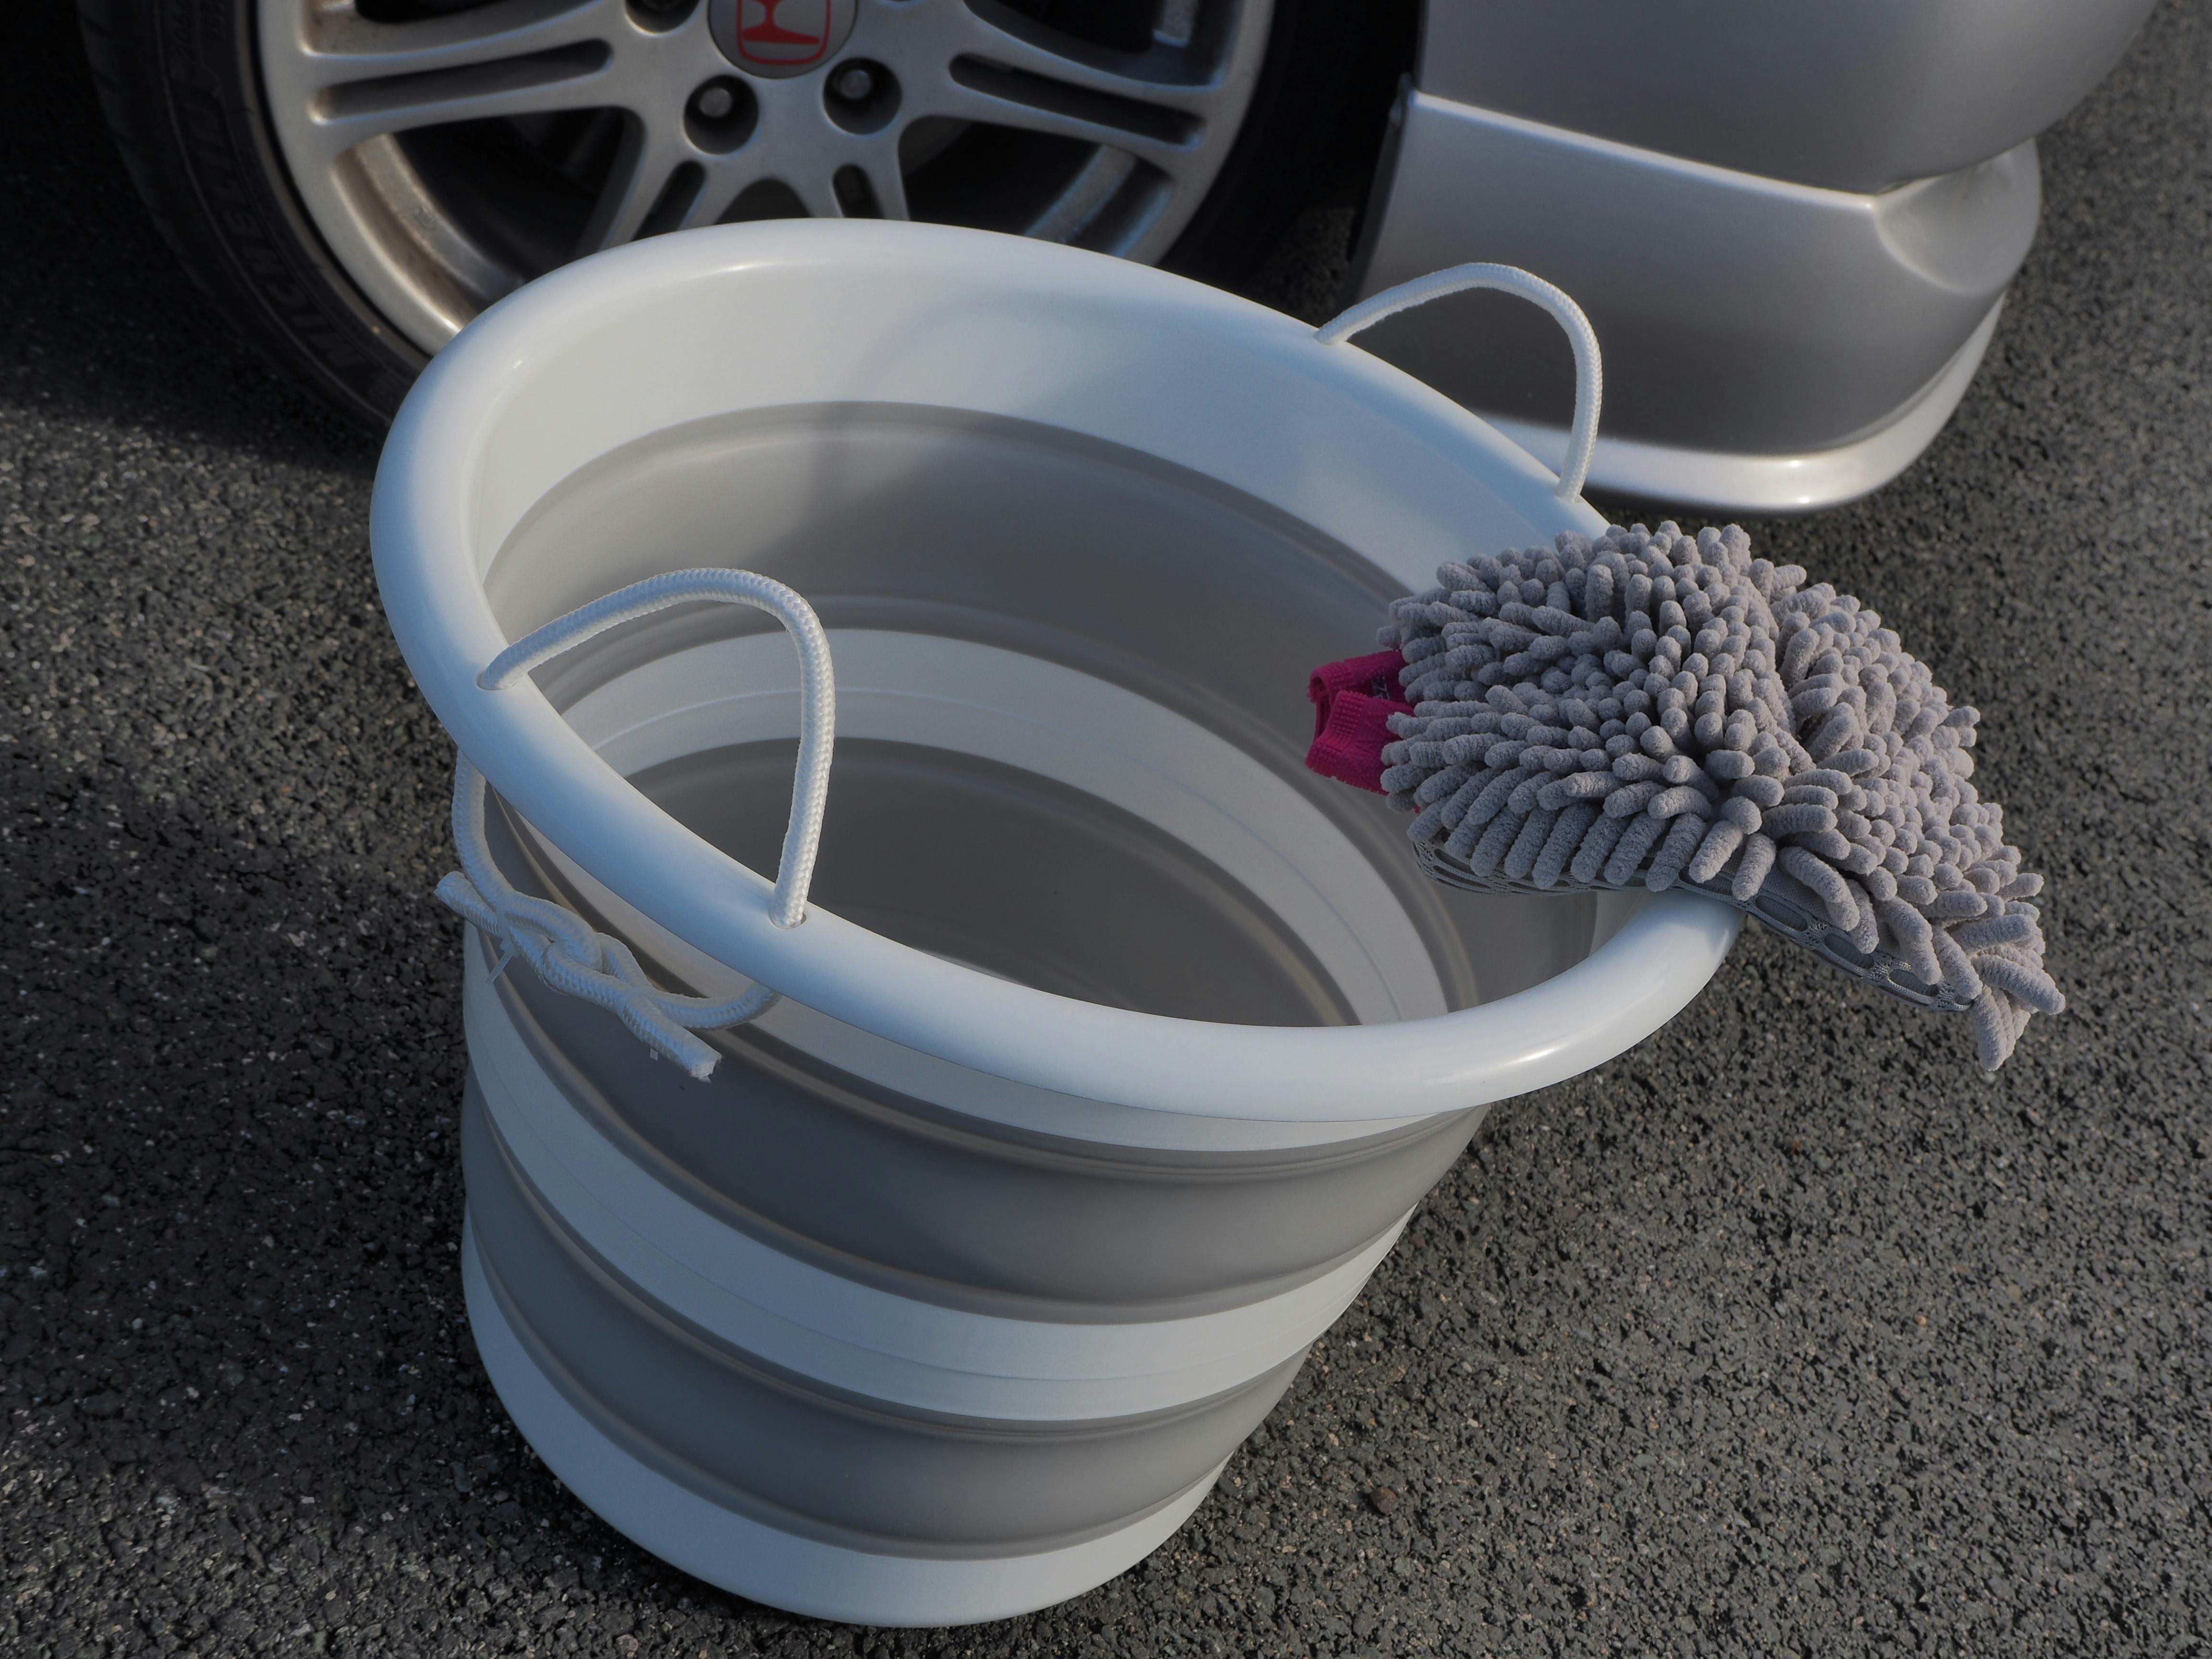 The bucket with a wash mitt next to it